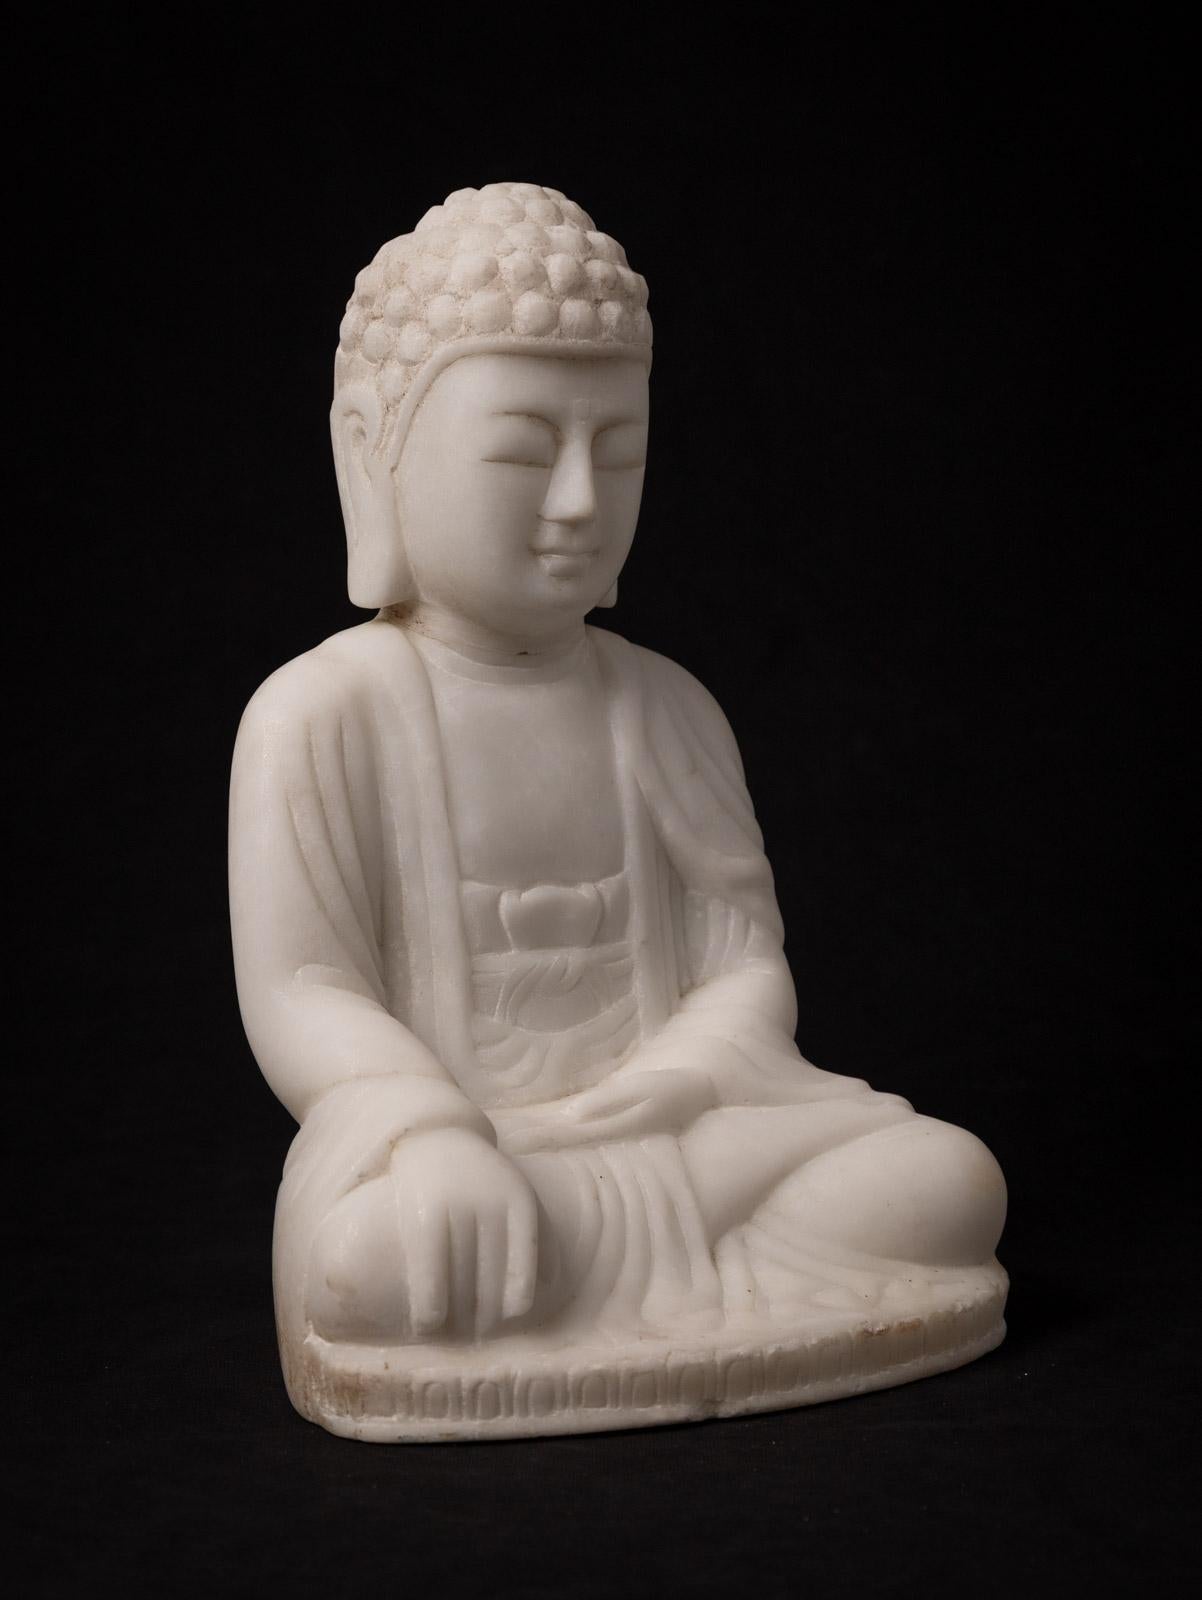 This elegant Marble Buddha statue, portraying the Bhumisparsha mudra, is a work of art that stands at 29,3 cm in height, with dimensions of 19,3 cm in width and 15,3 cm in depth. Carved by hand from a single block of white marble, it represents a